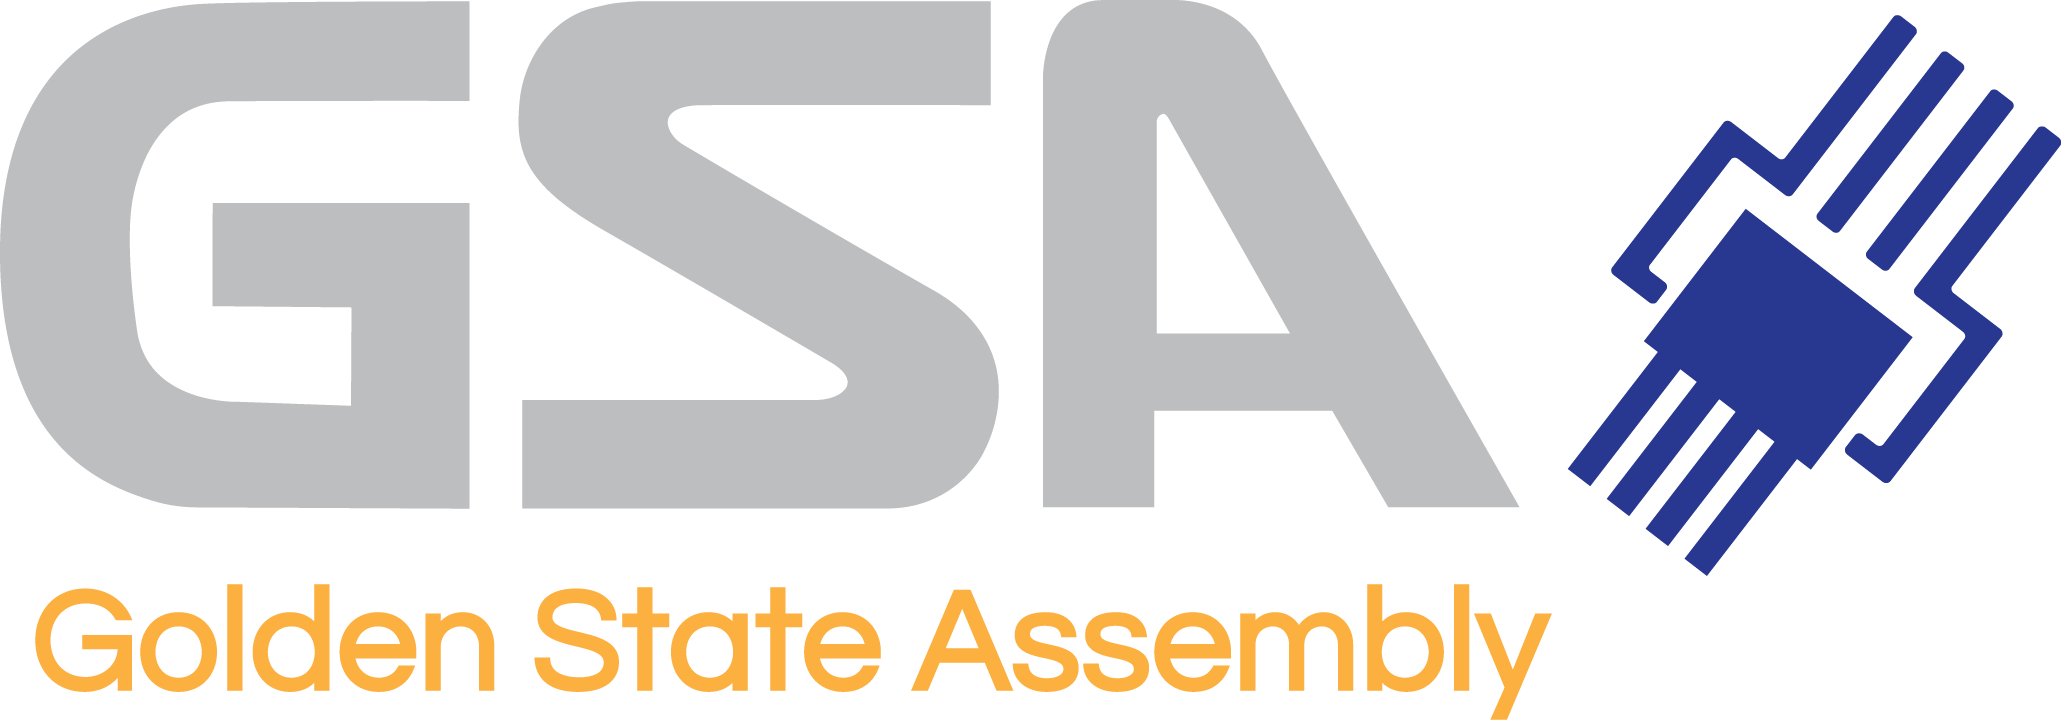 Golden State Assembly